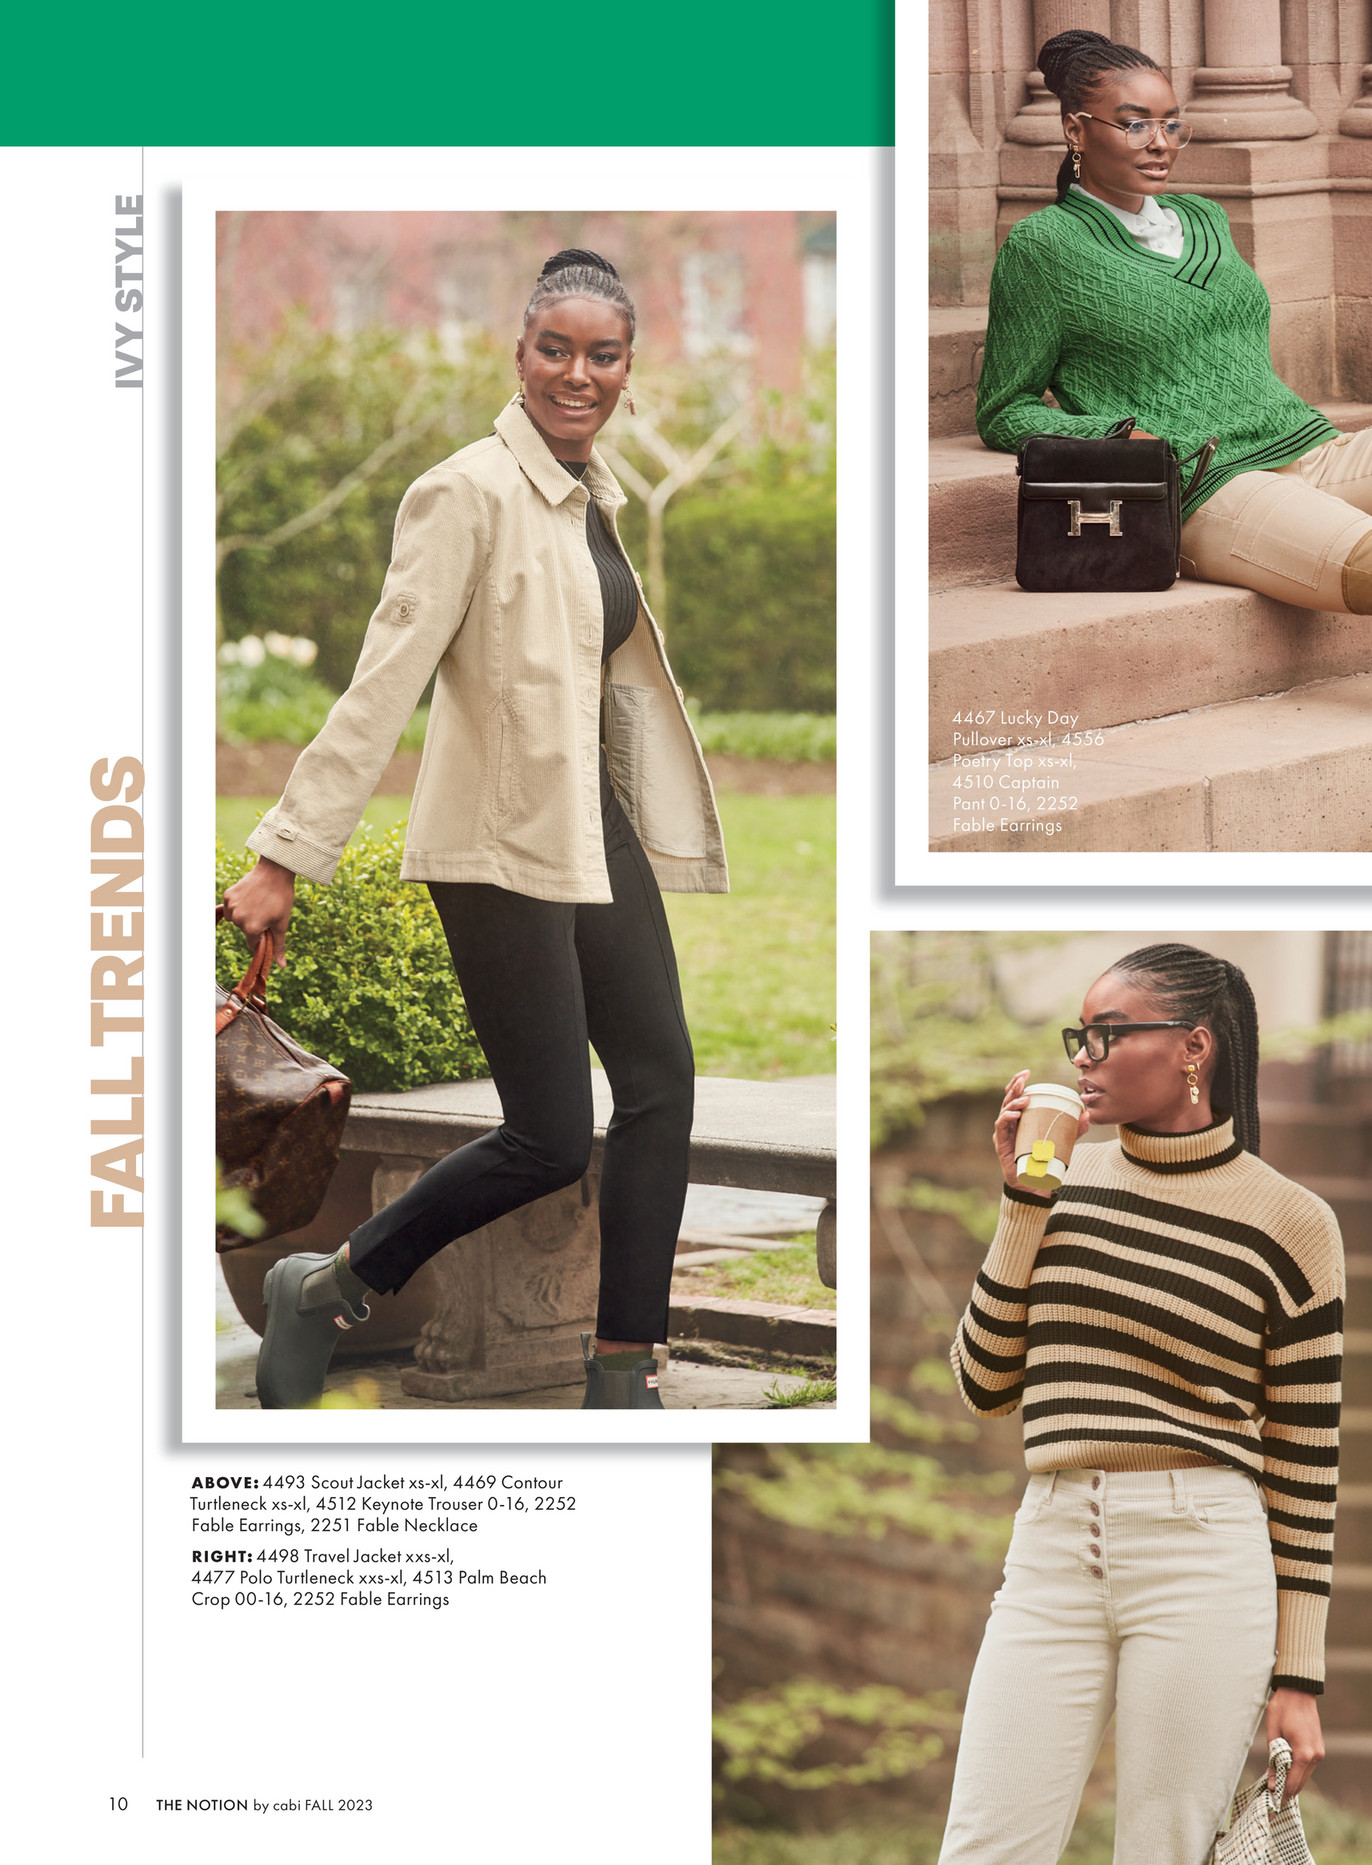 Cabi - Fall 2023 Notion - Page 8-9